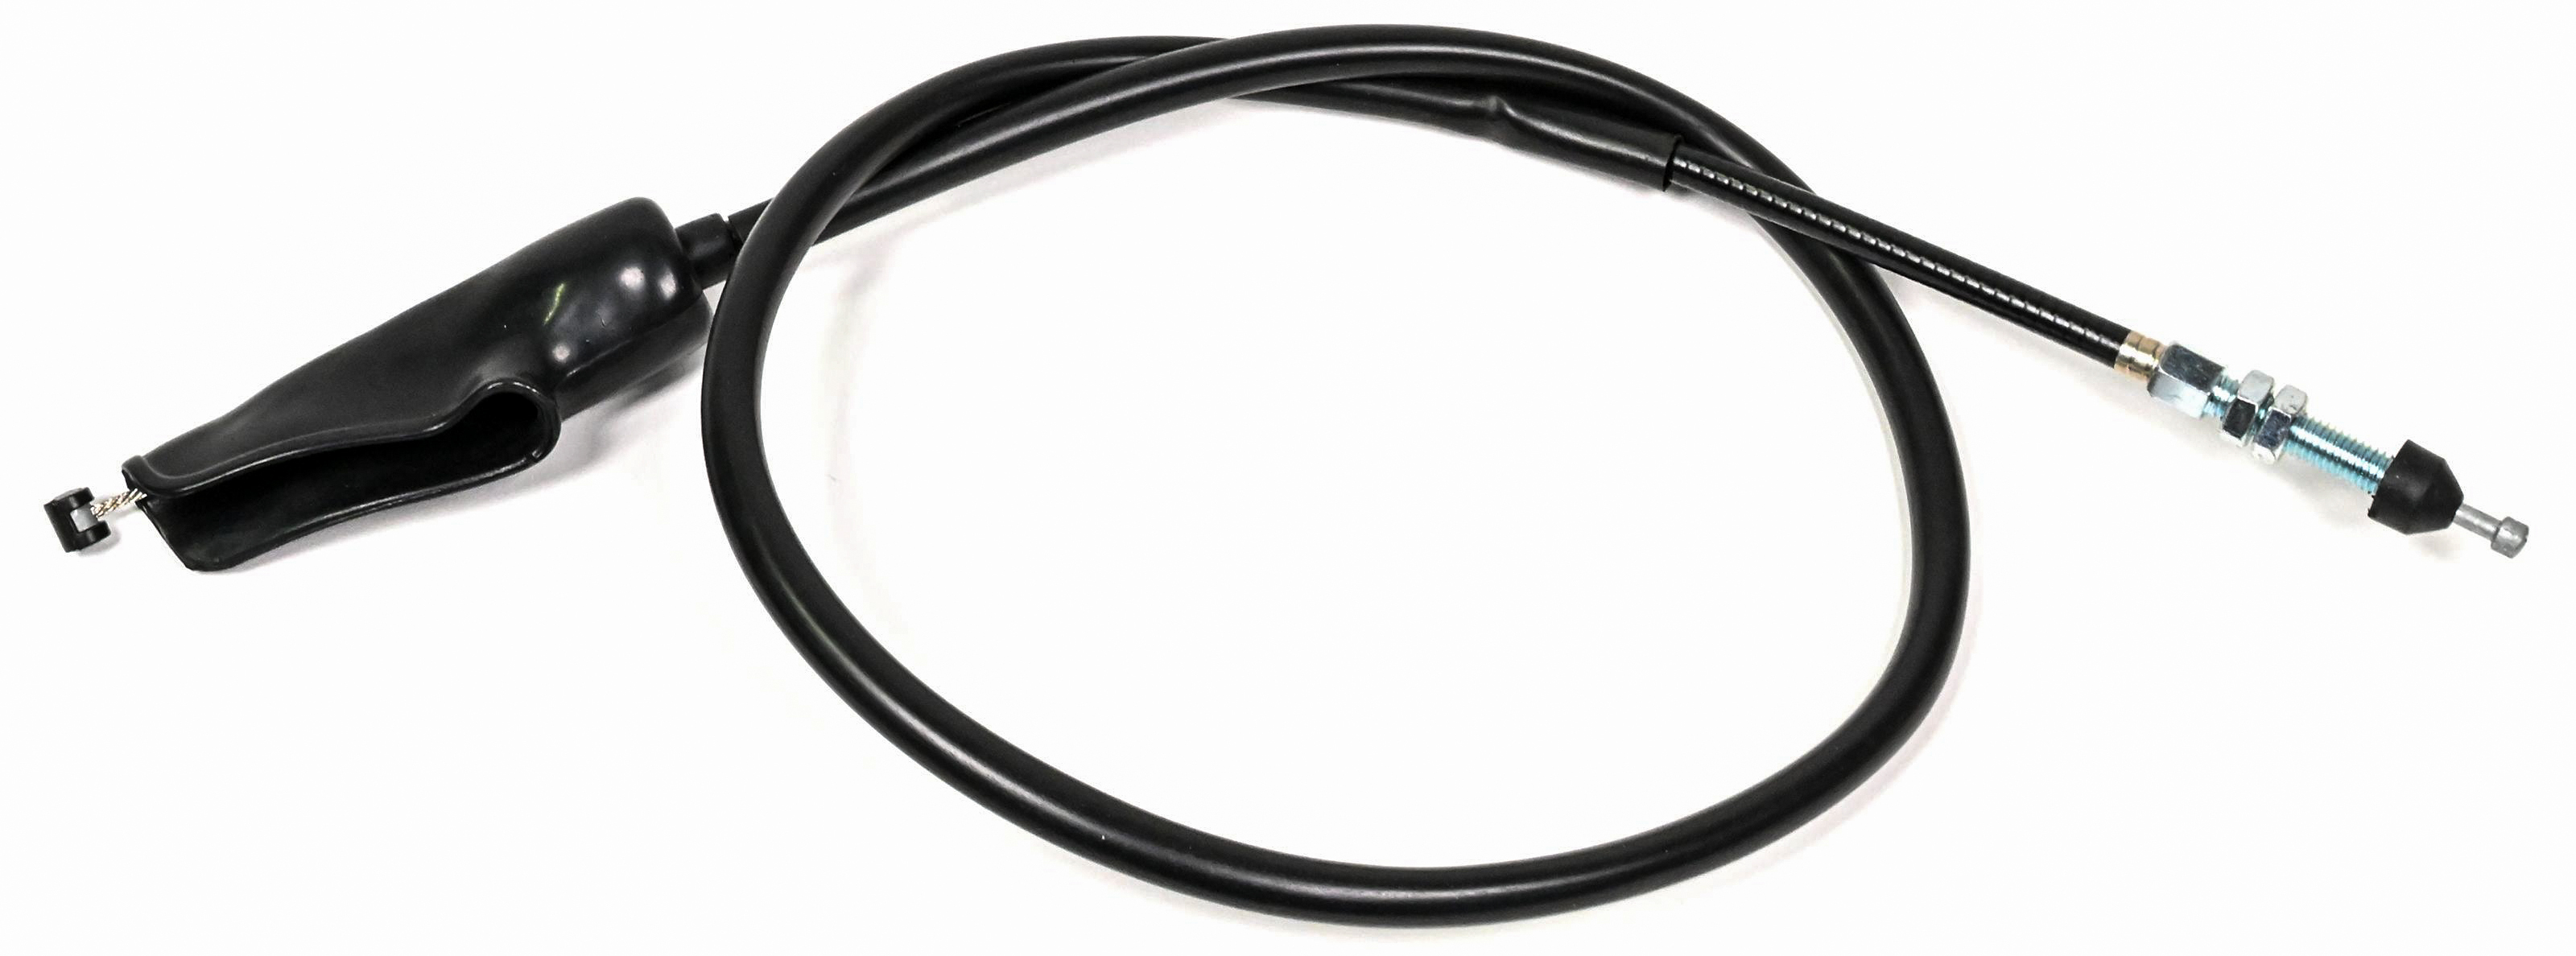 Bbr - Clutch Cable - Extended - 514-KLX-1101